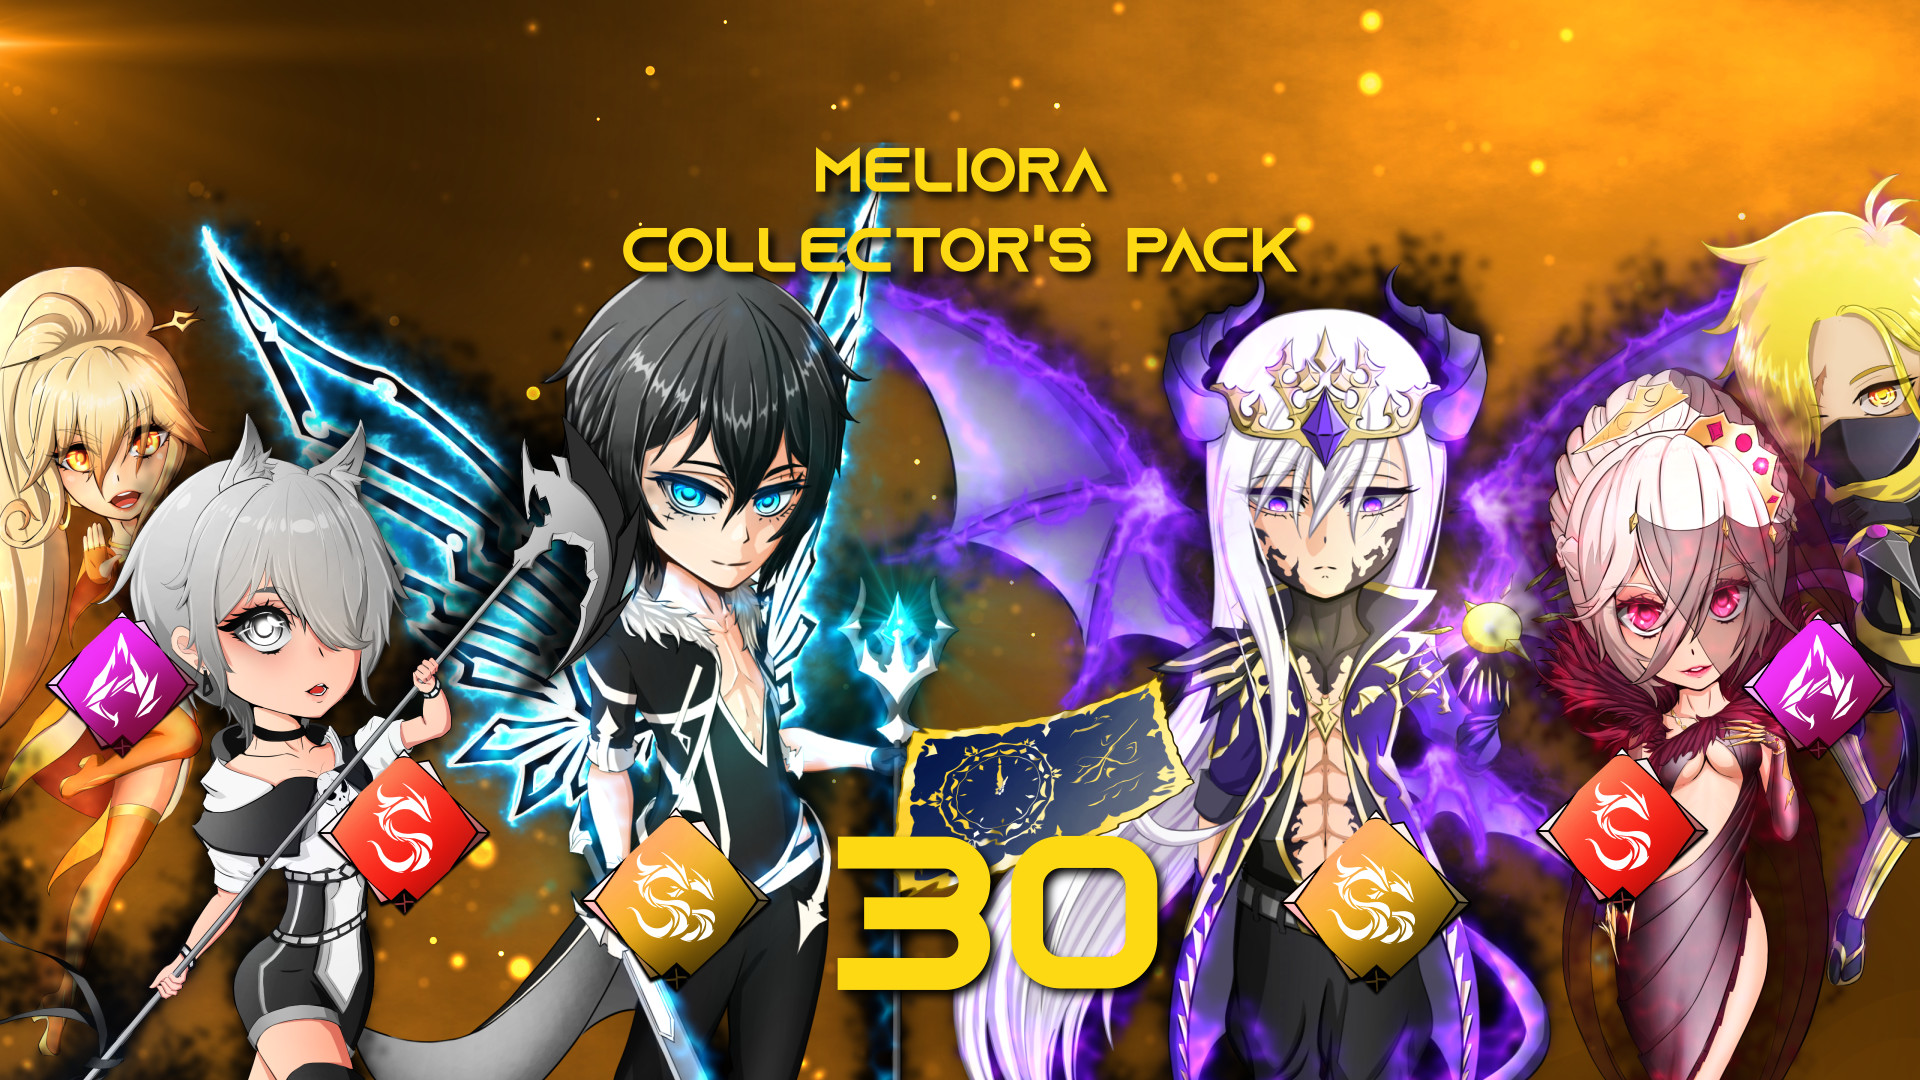 Meliora - Collector's Pack DLC Steam CD Key 5.03 usd